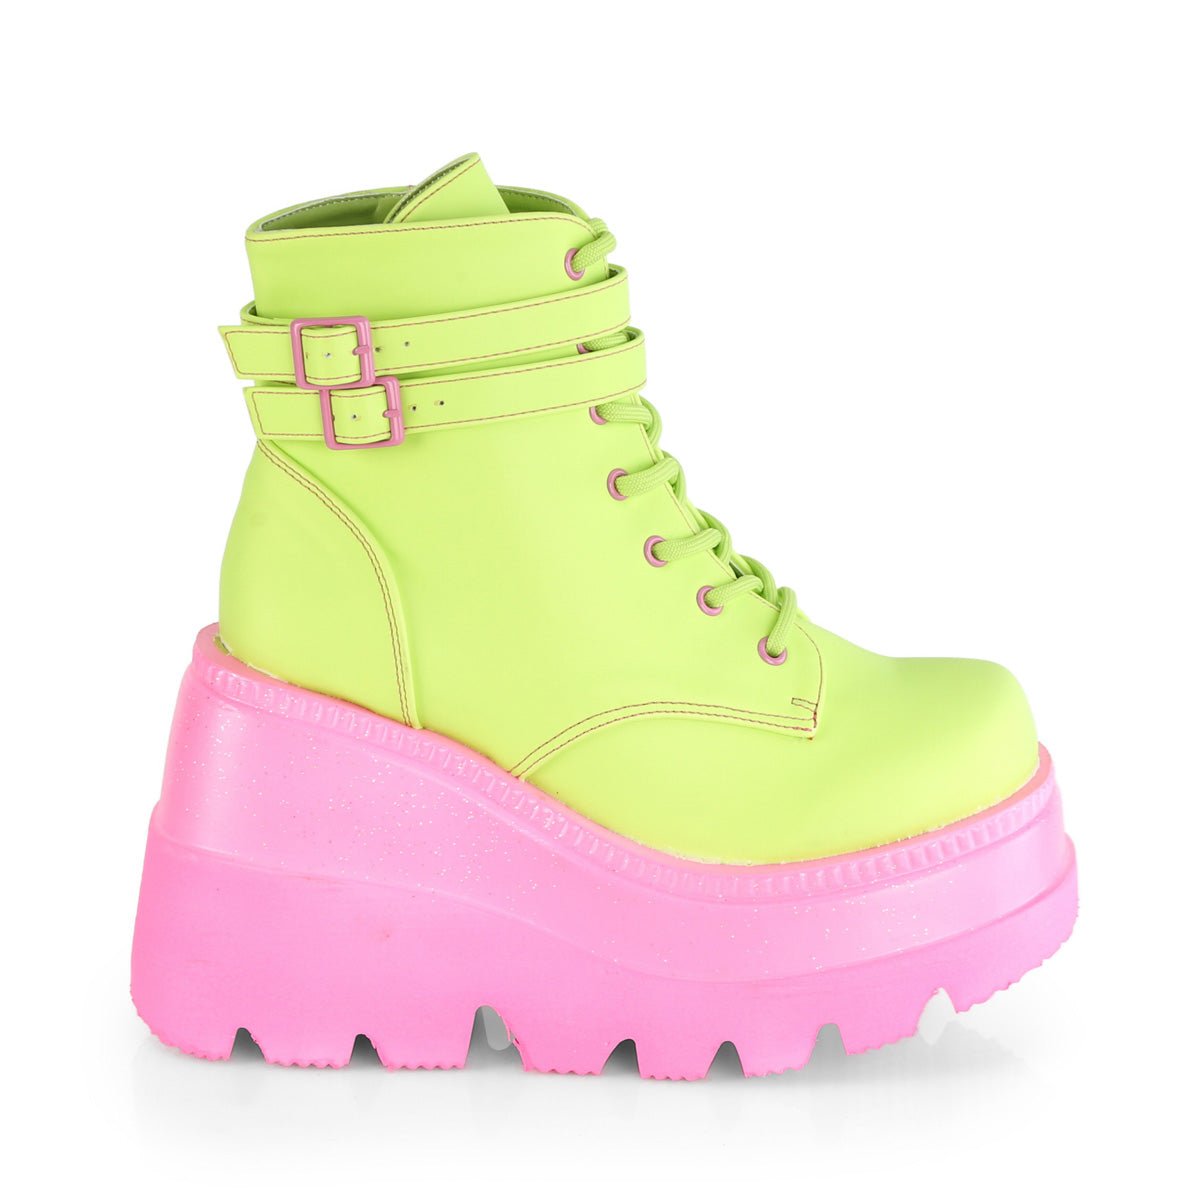 Too Fast | Demonia Shaker 52 | Lime Green Reflective Vegan Leather Women&#39;s Ankle Boots